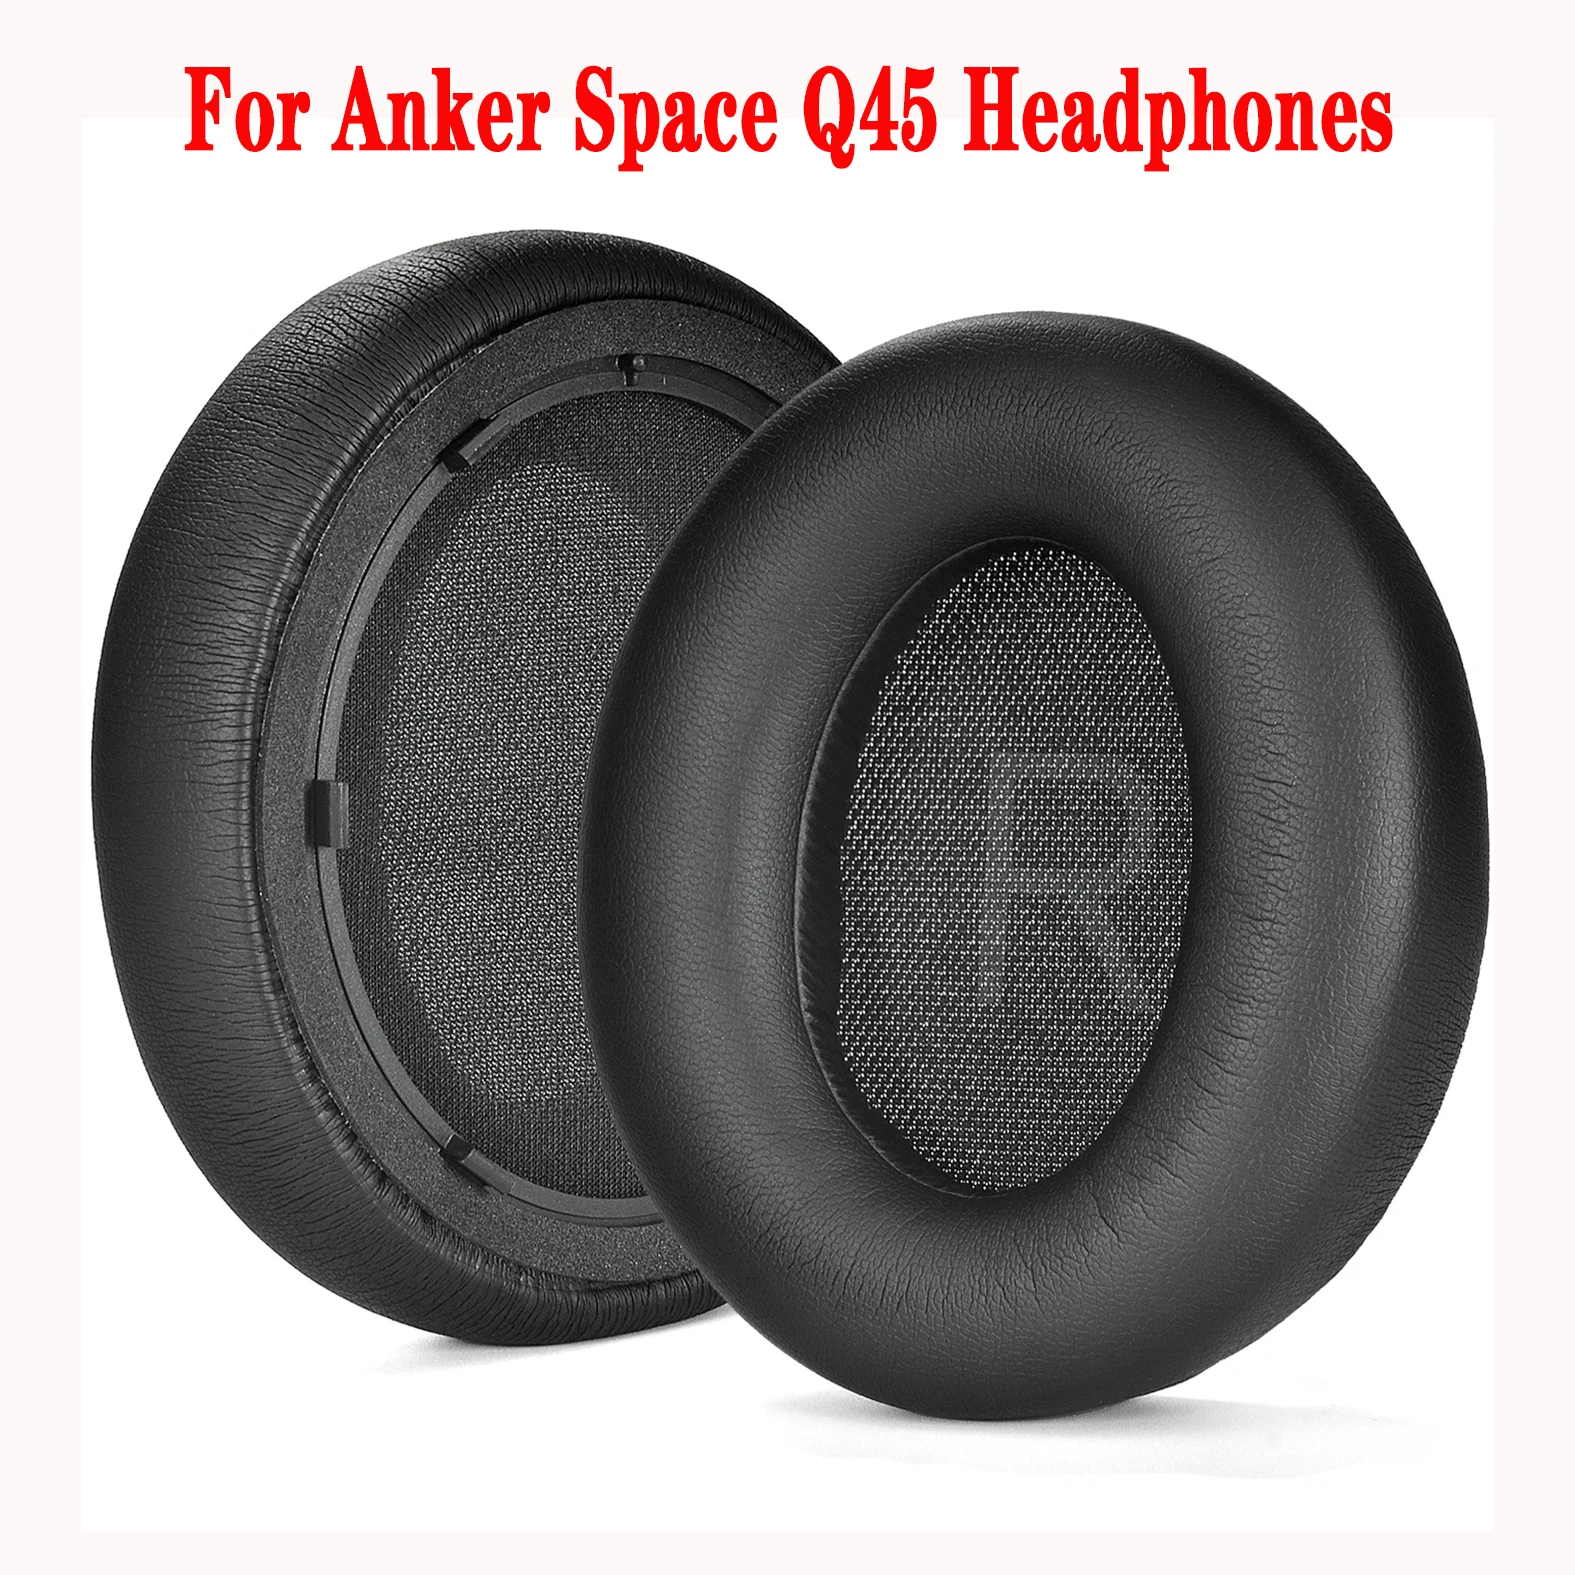 Comfortable Sponge Ear Pads For Anker Space Q45 Headphones Earpad Enjoy Clear Sound Quality Noise-Isolating EarPads Cushions